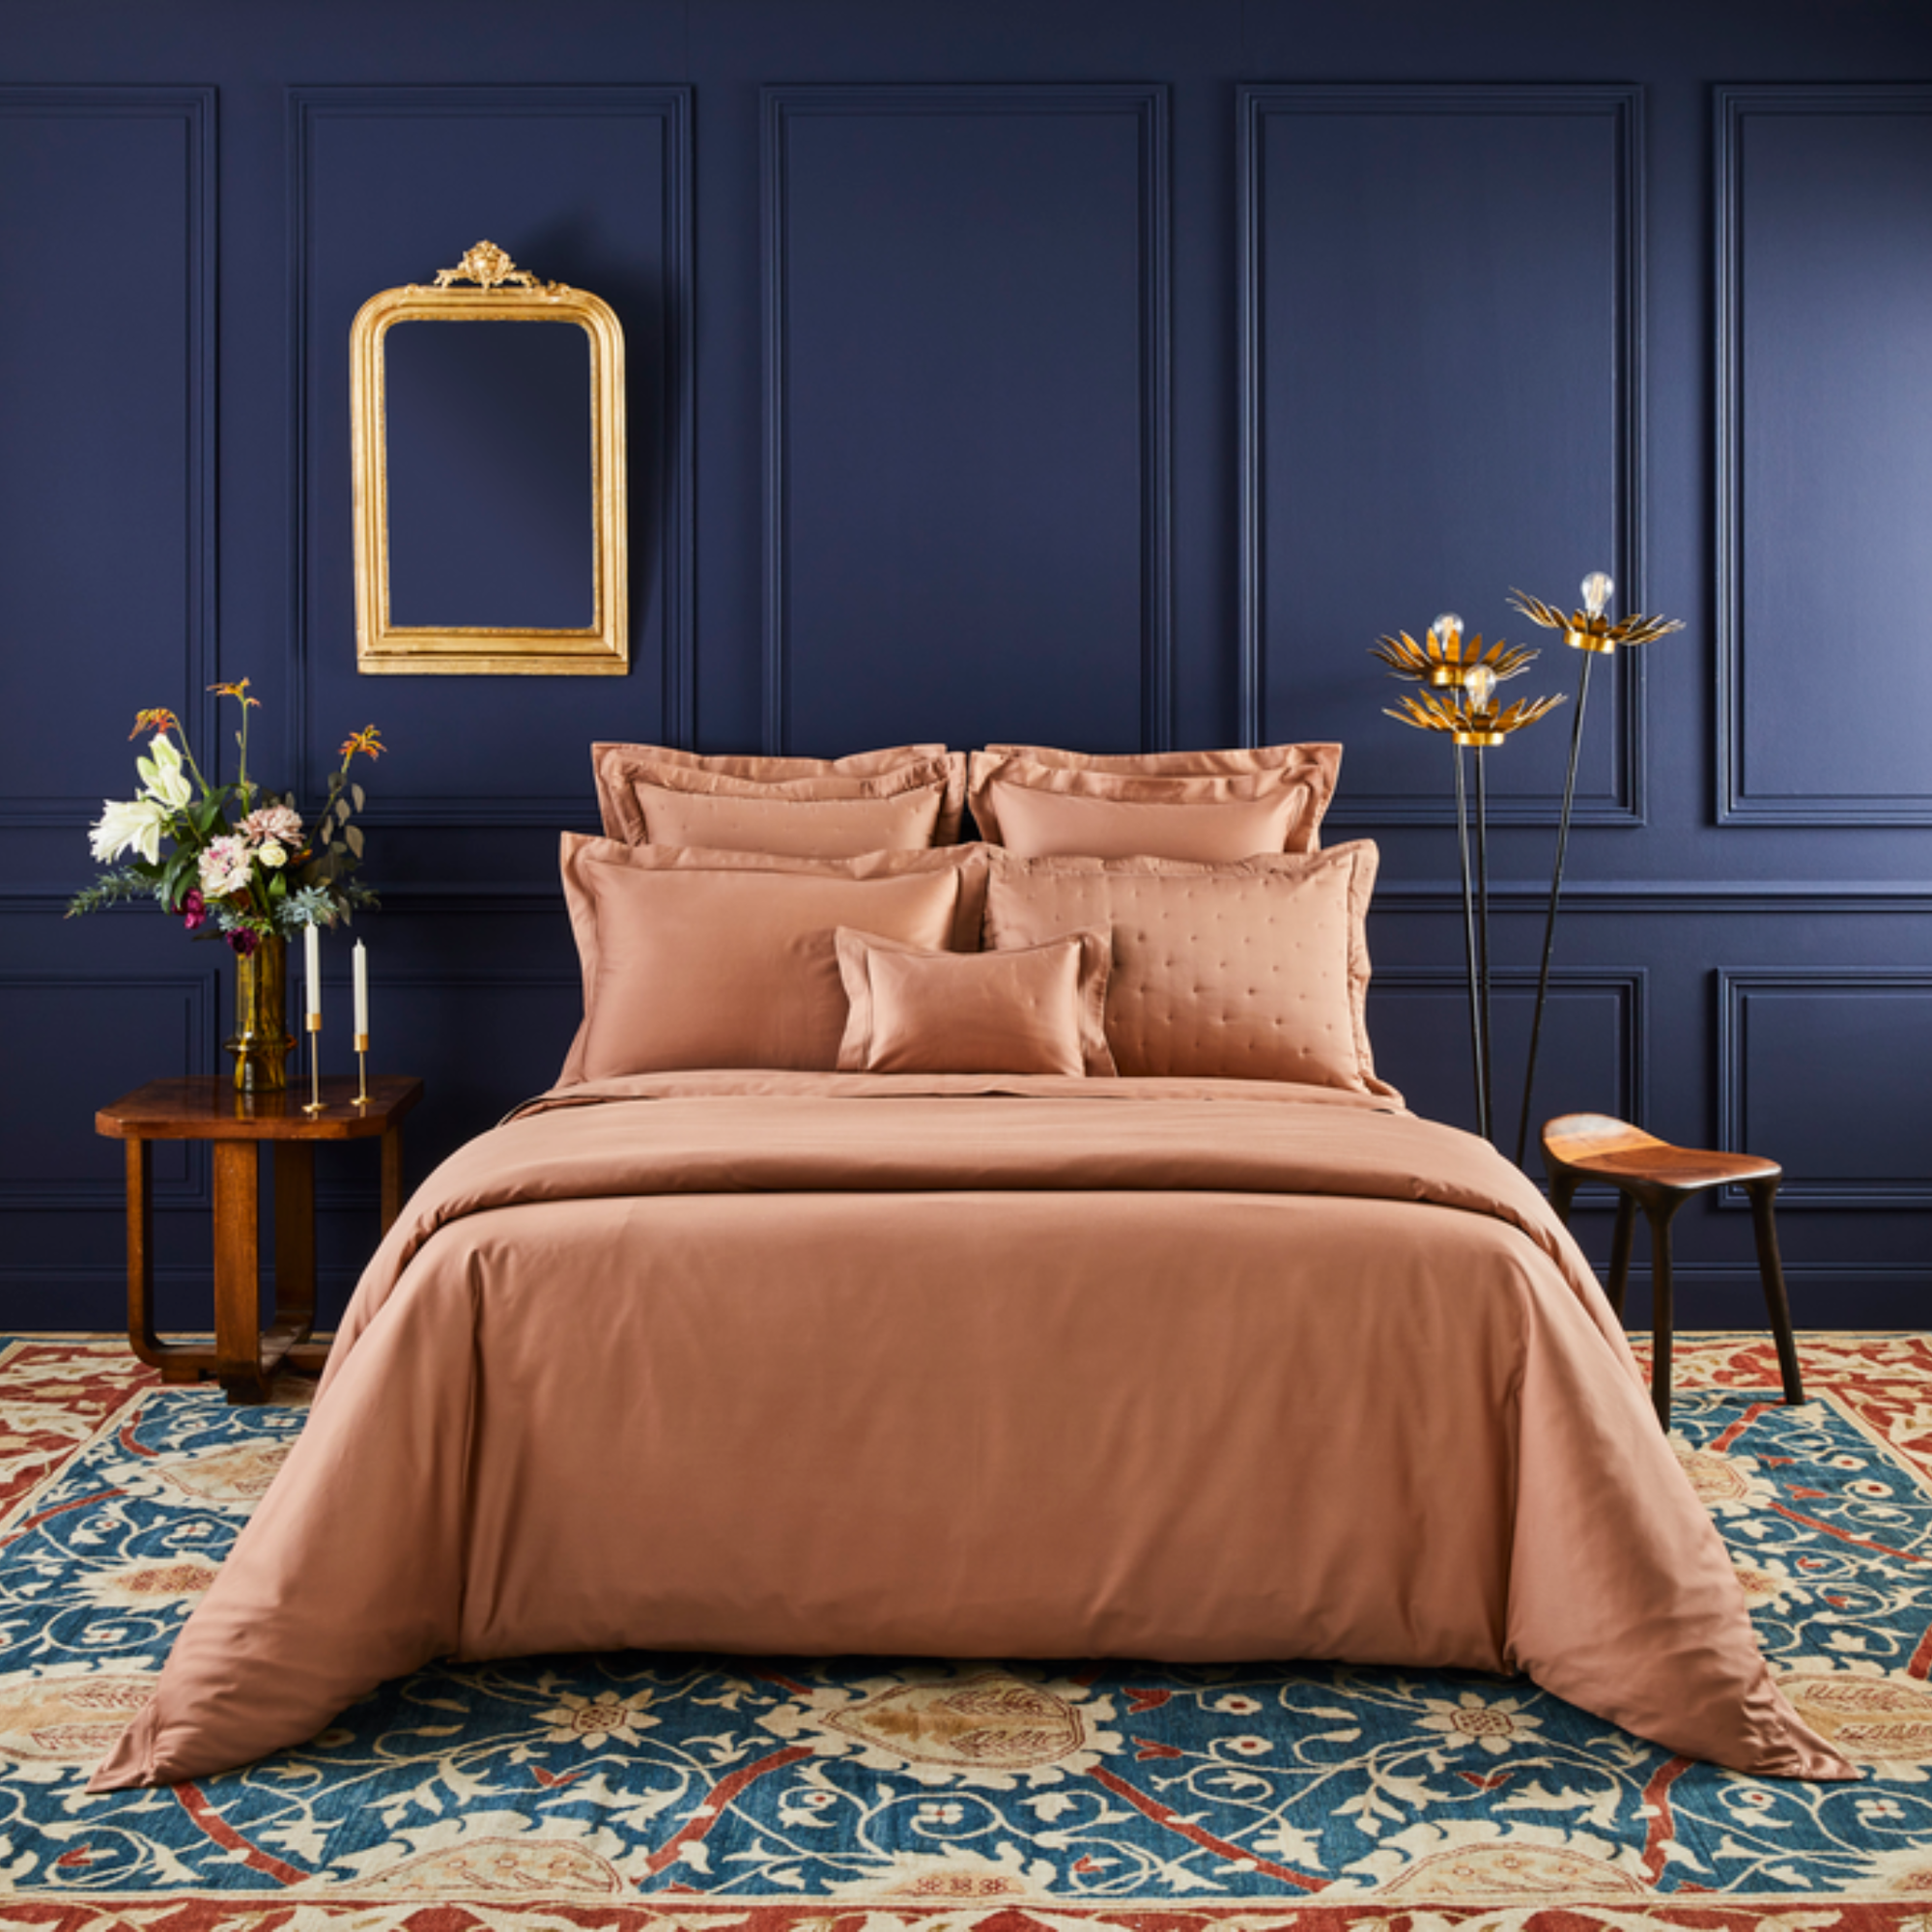 Full Bed Dressed in Yves Delorme Triomphe Bedding Fine Linen in Sienna Color